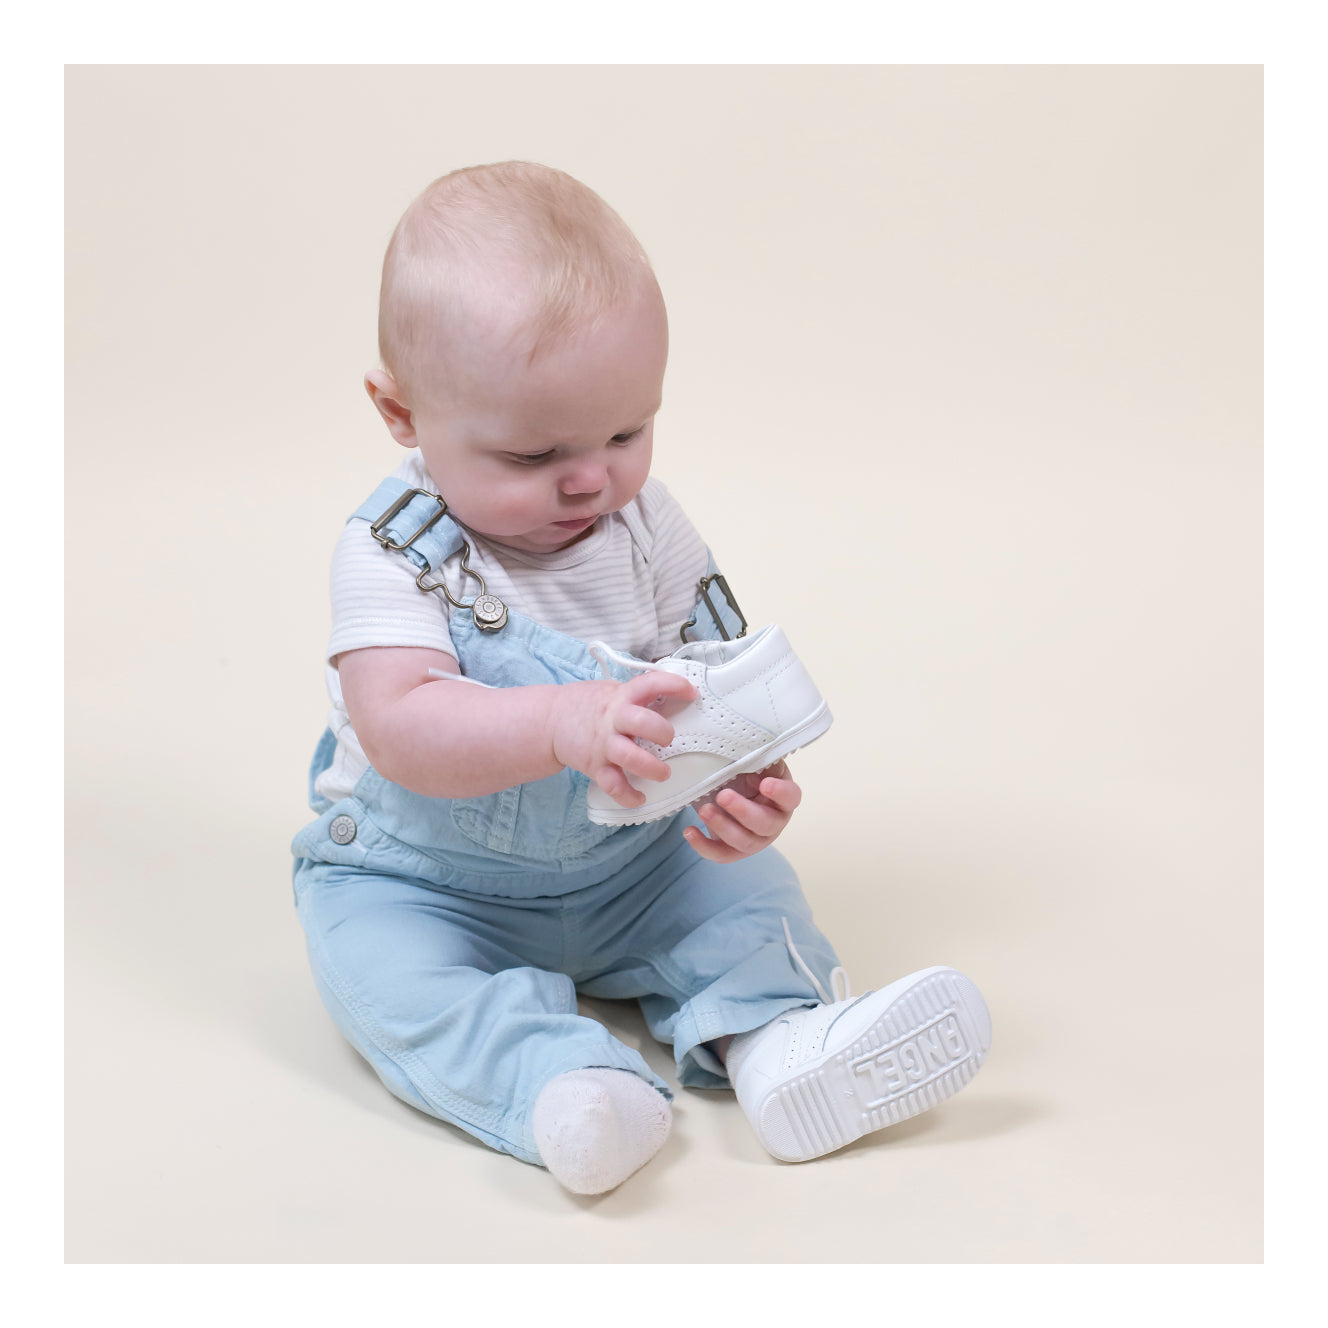 James Boy's White Leather Lace Up Shoe (Baby)